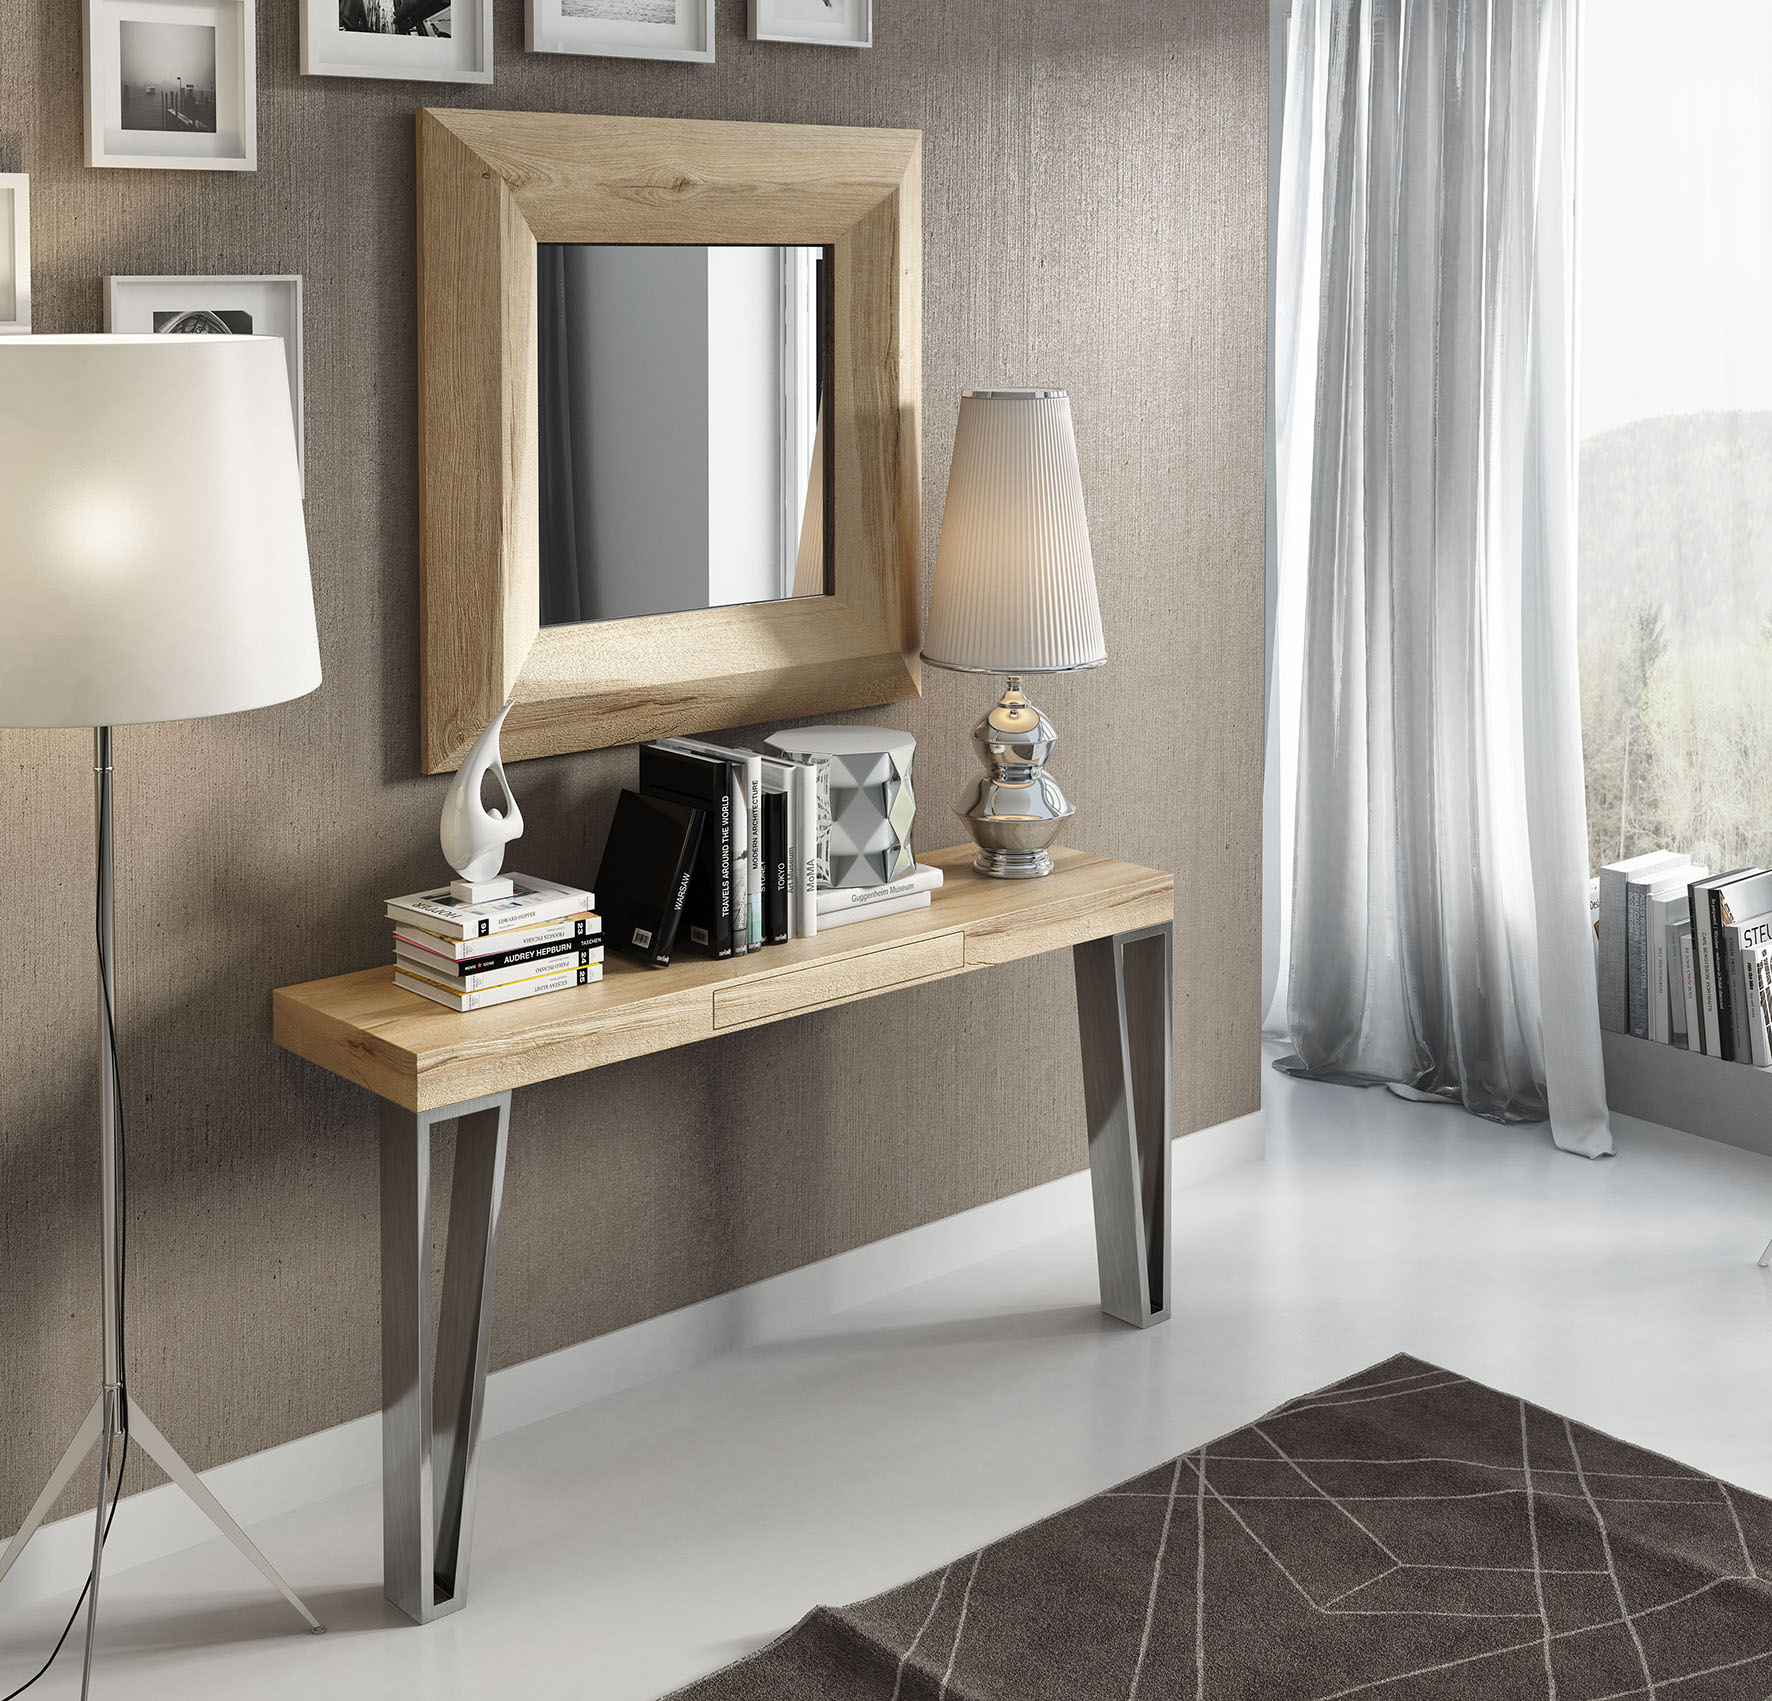 Brands MSC Modern Wall Unit, Italy CII.43 Console Table